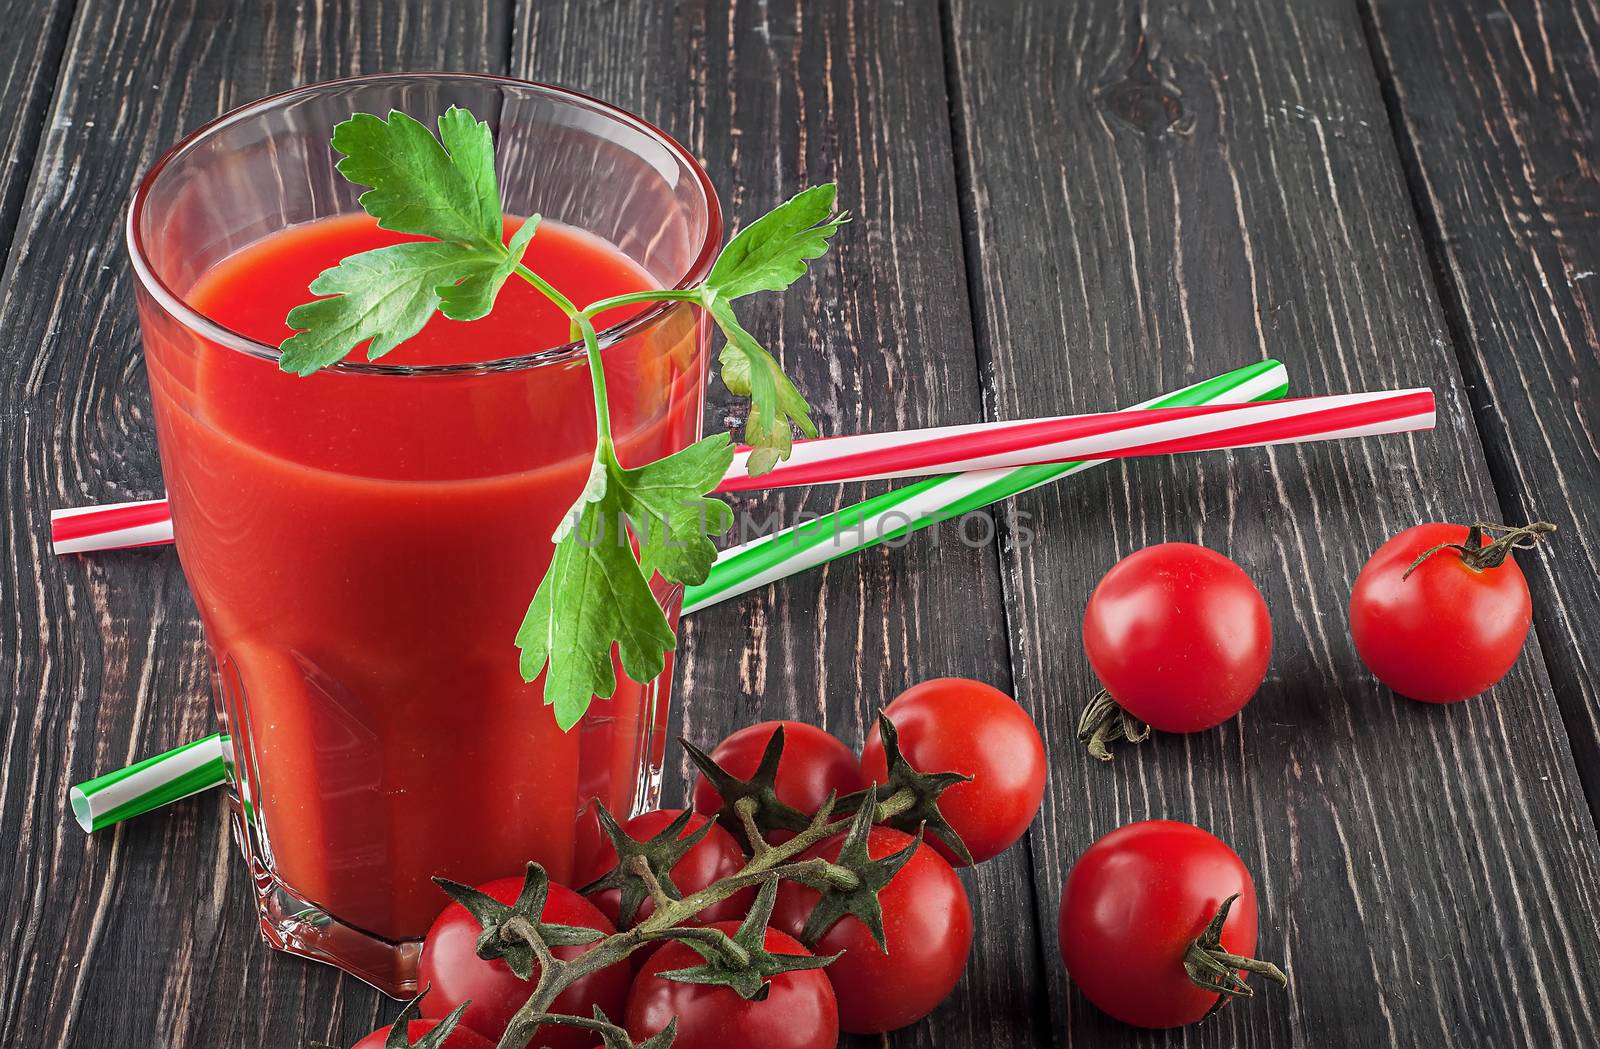 Glass of tomato juice on wooden table. Cherry tomatoes and cocktail stick lying nearby.